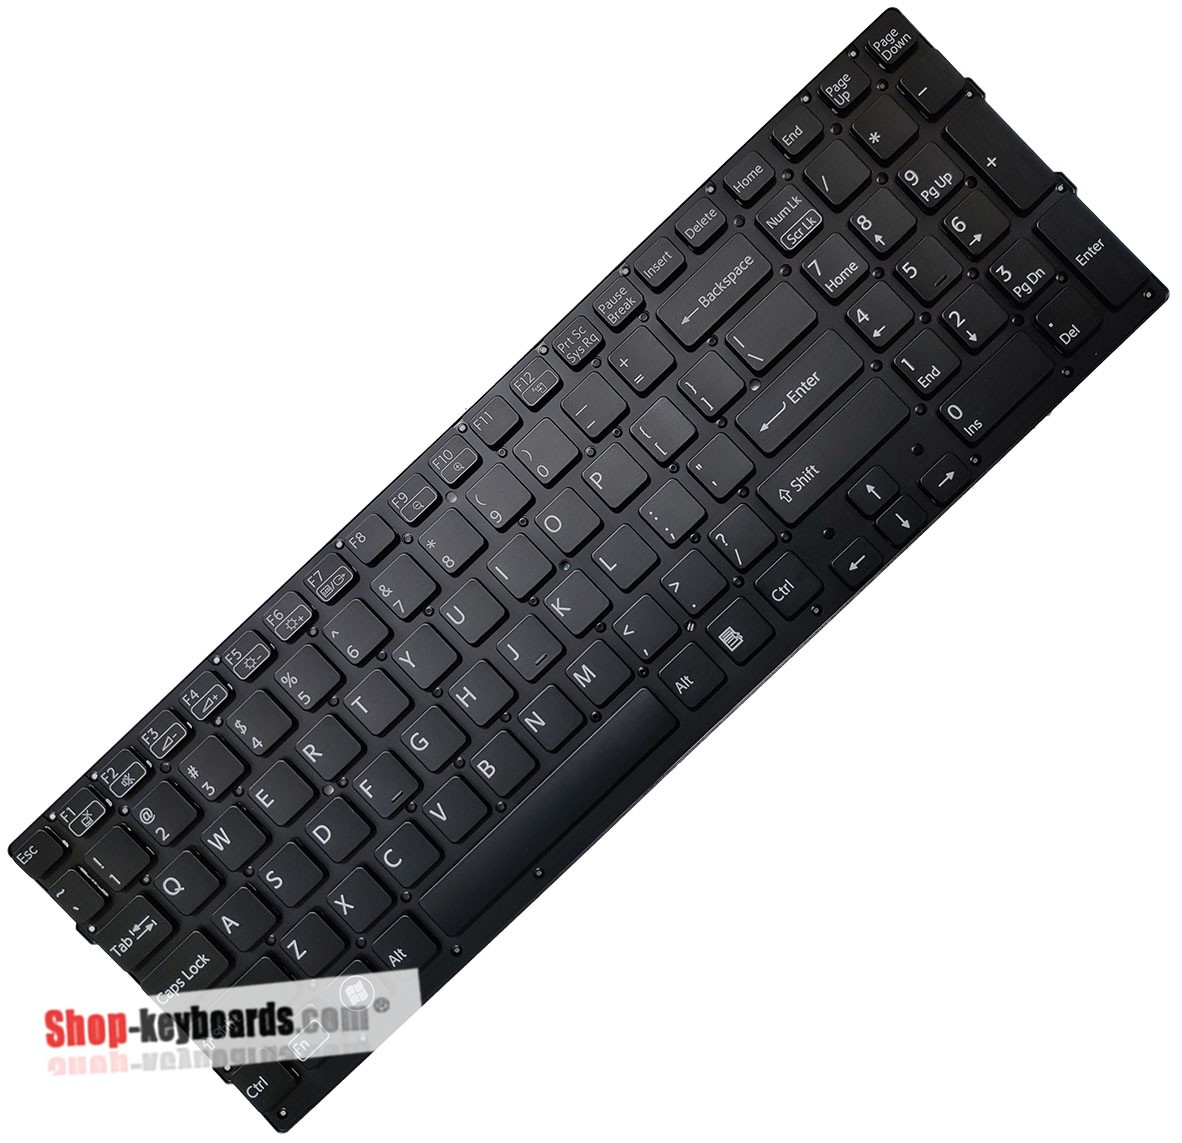 Sony VAIO VPC-F24M1E Keyboard replacement